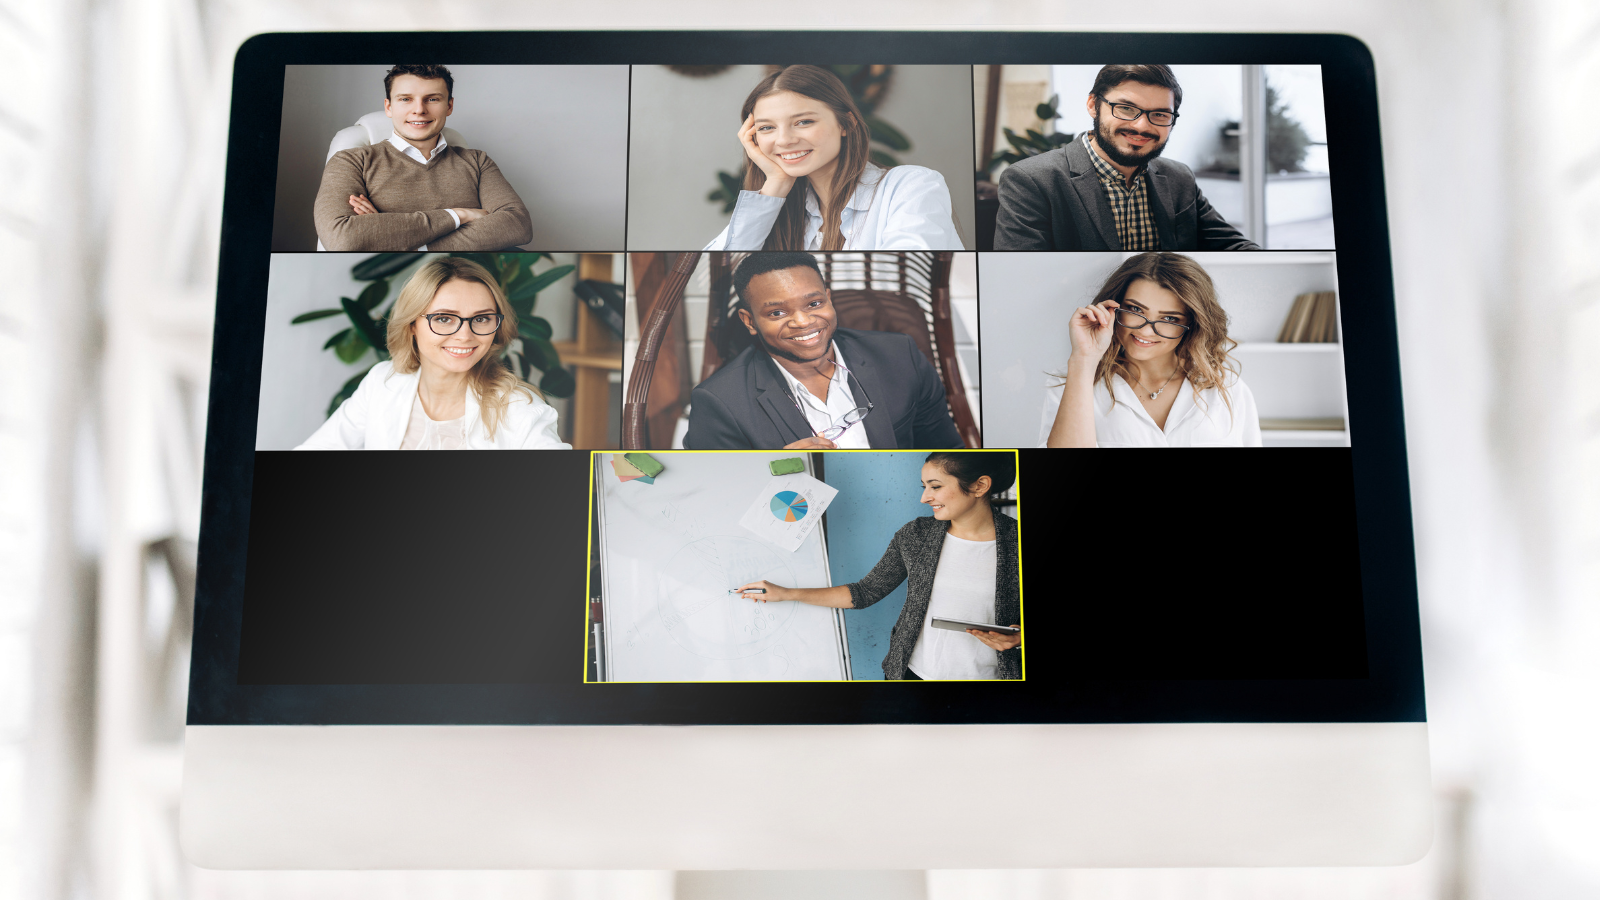 How To Make Remote Meetings Productive and Engaging